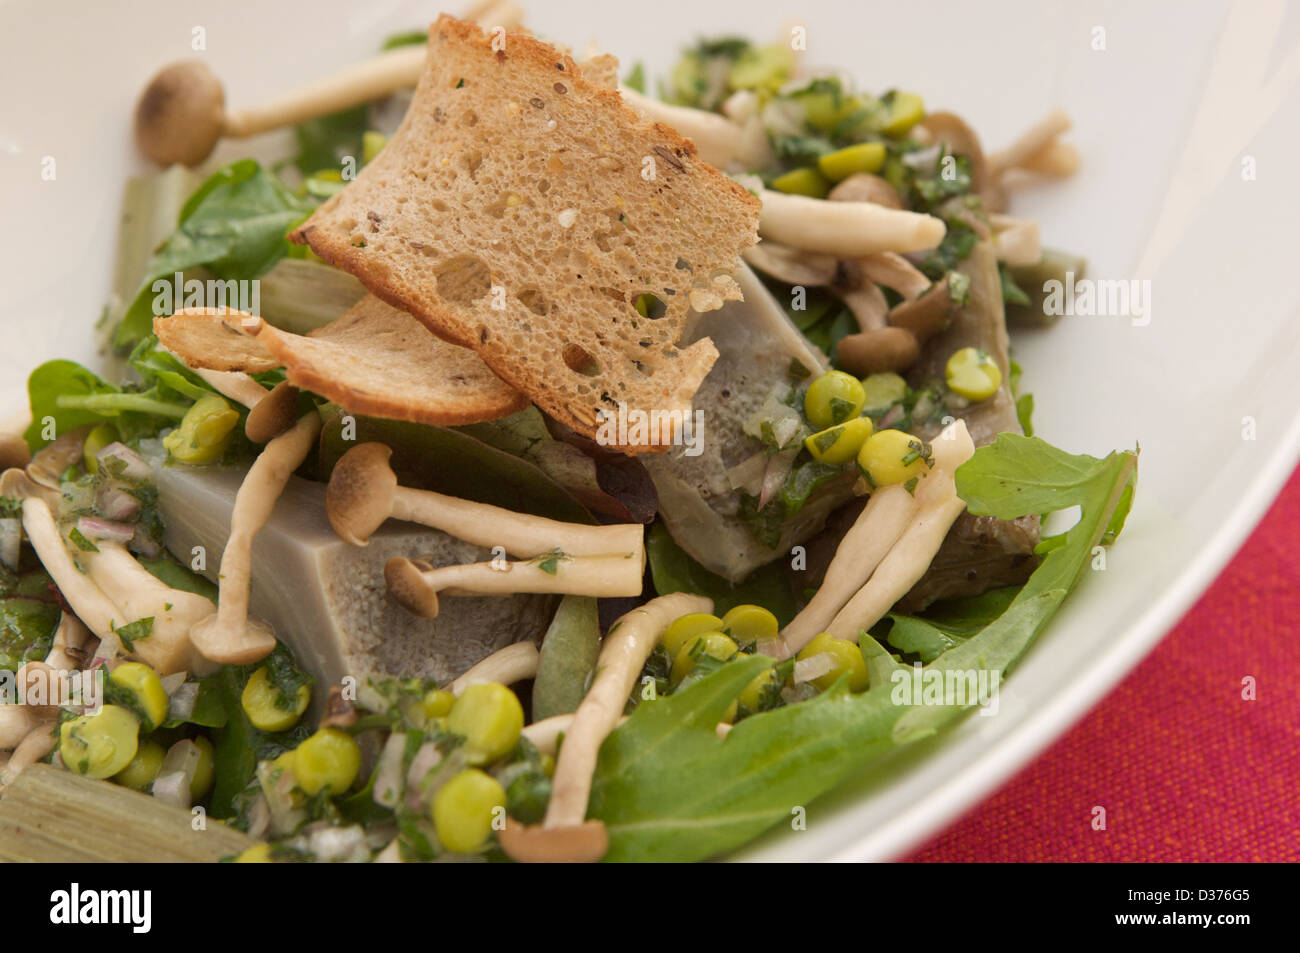 Artichoke salad with pickled shimeji mushrooms and peas served on a bed of green garden salad. Stock Photo